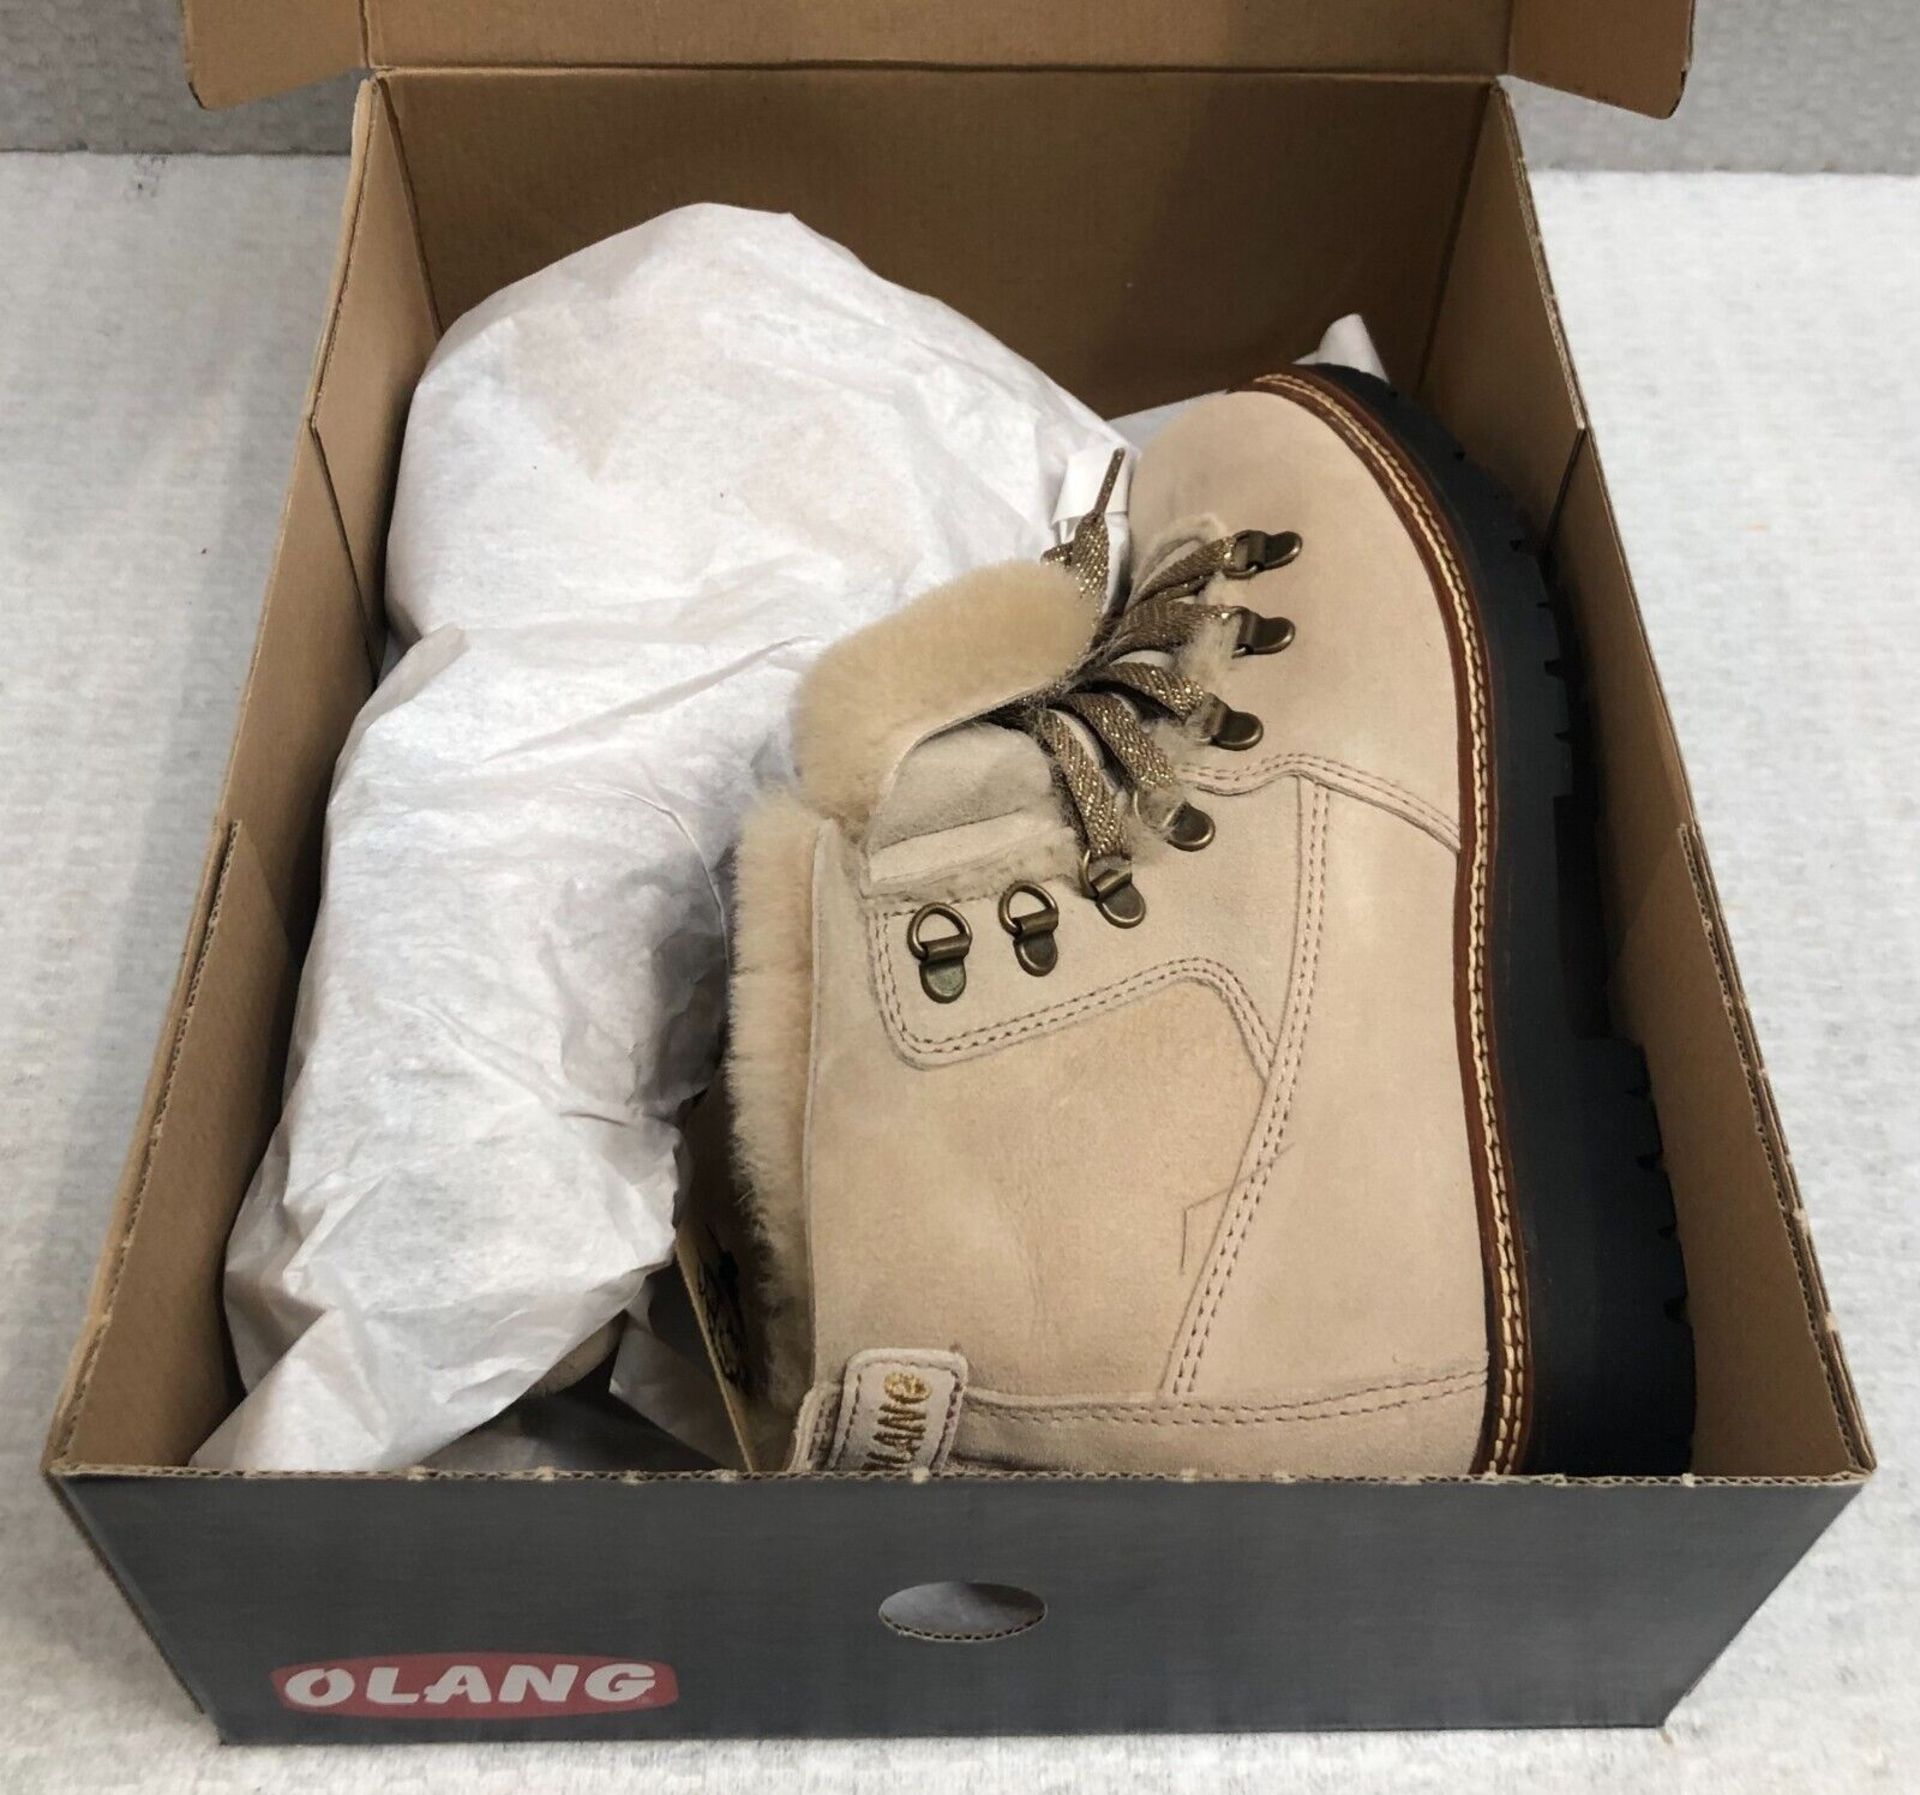 1 x Pair of Designer Olang Women's Winter Boots - Aurora.Lux 88 Beige - Euro Size 39 - New Boxed - Image 6 of 6